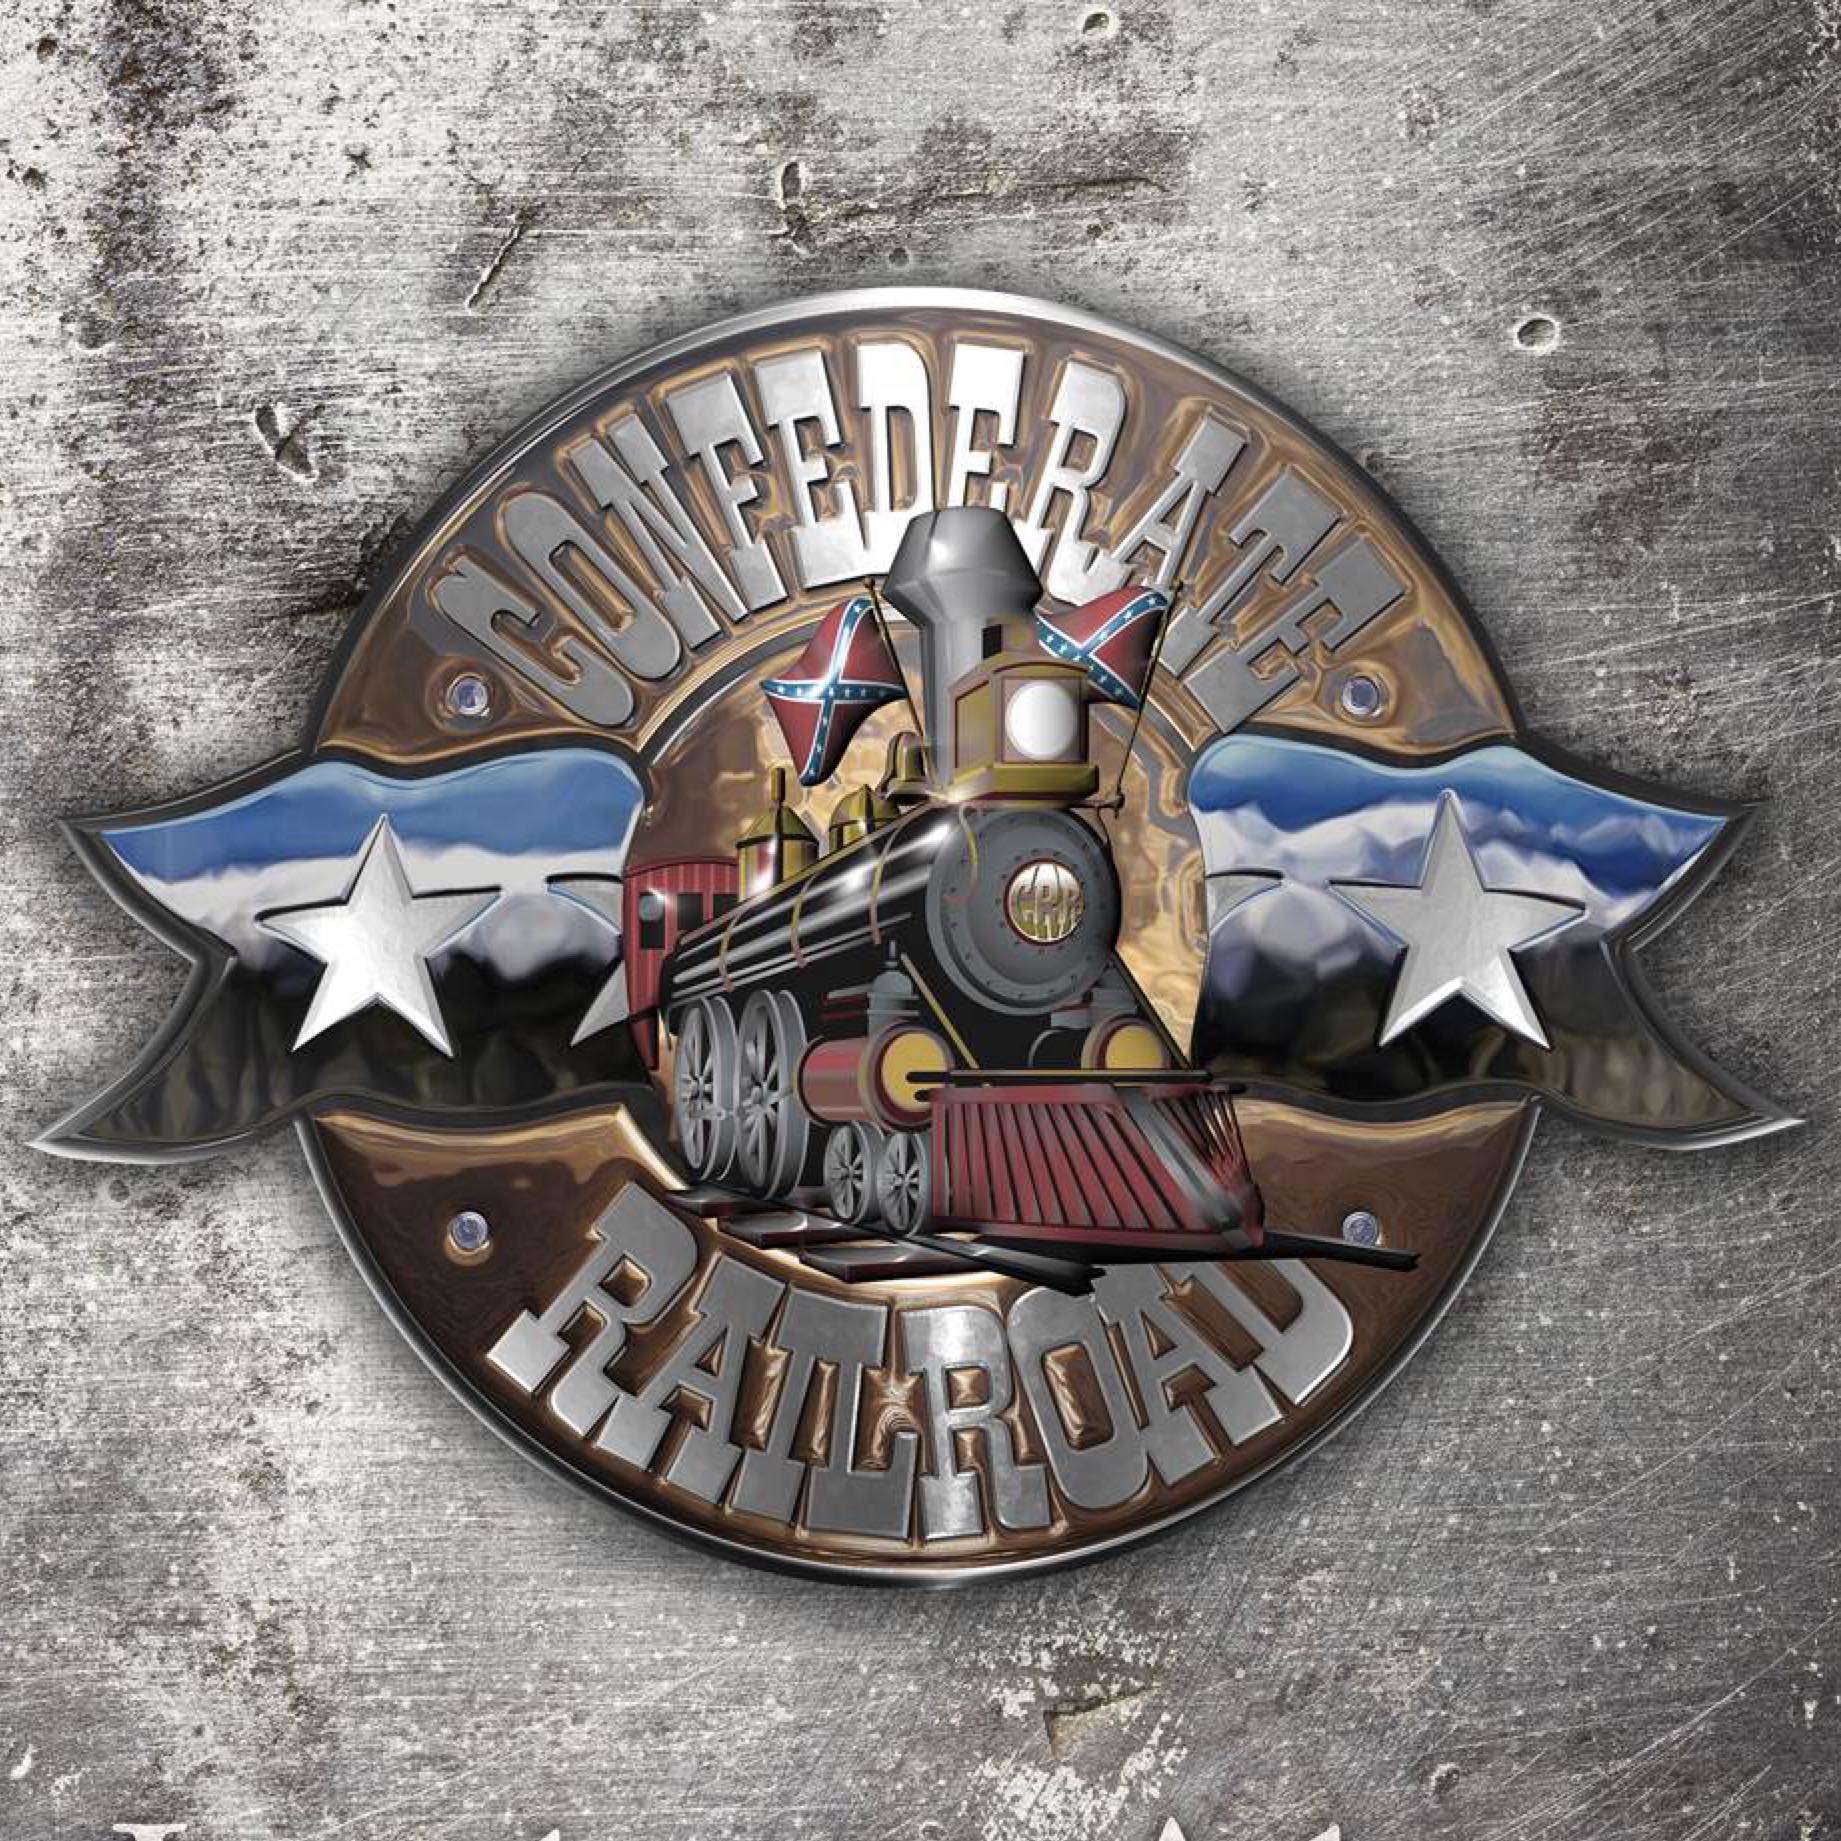 Confederate Logo - Confederate Railroad dropped from another state fair due to logo